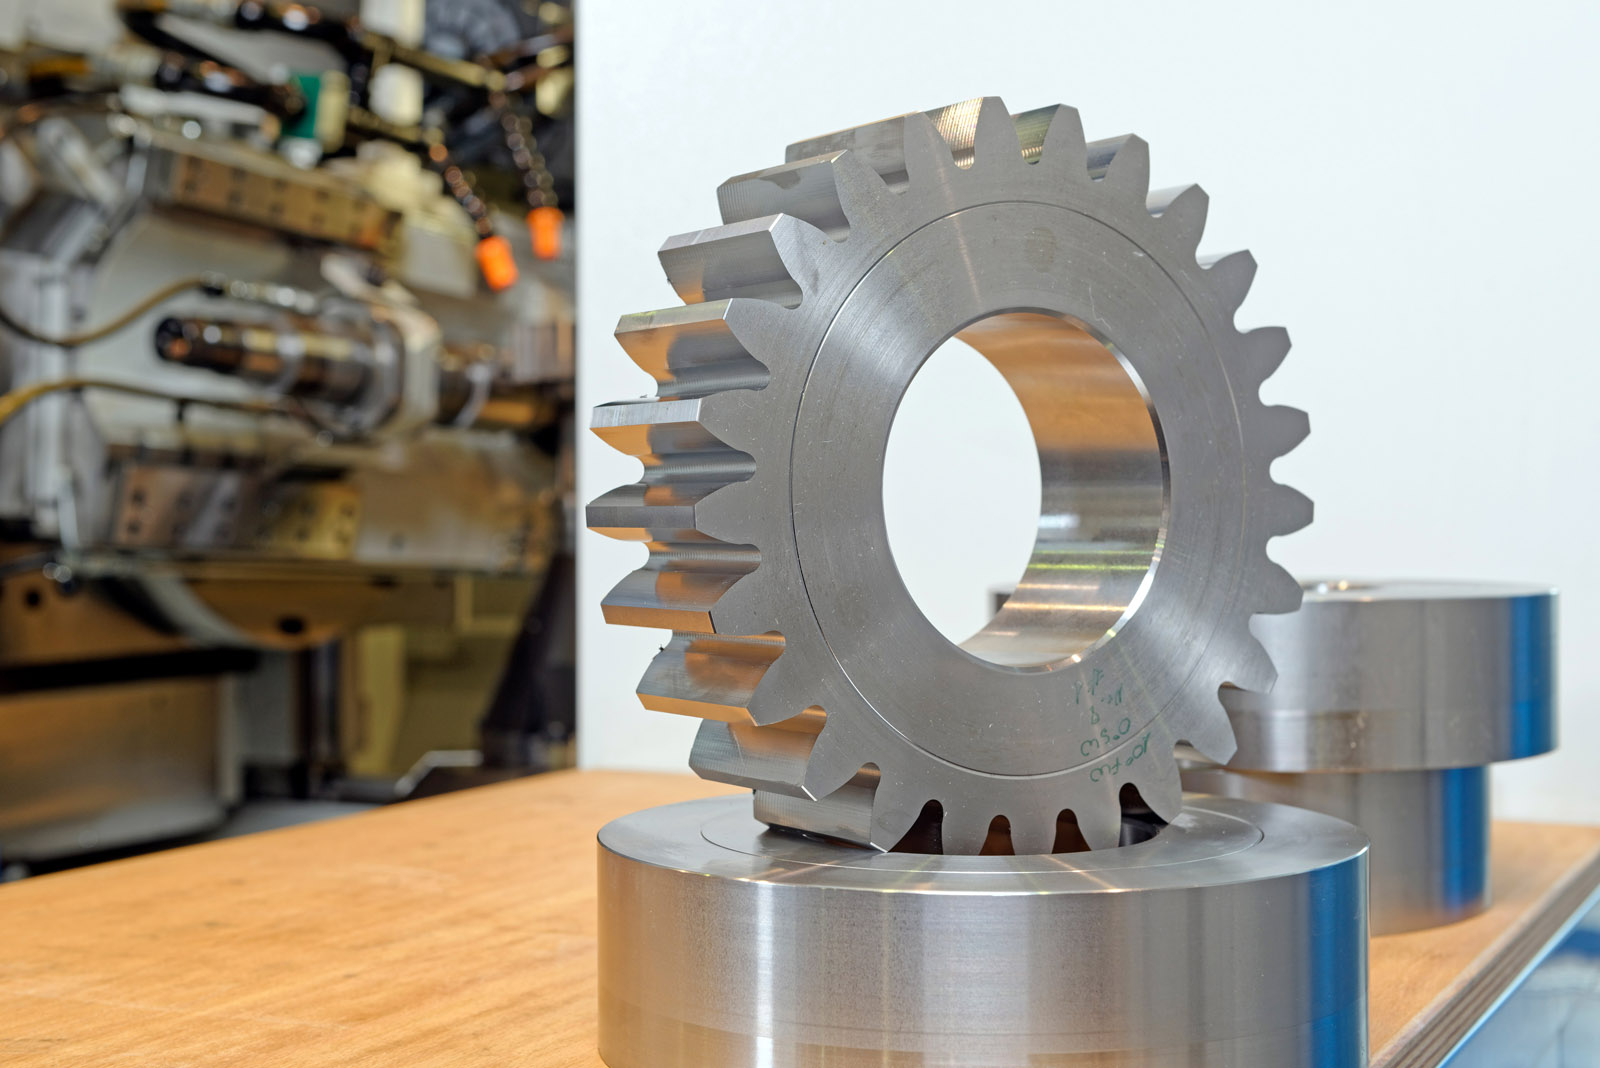 Fraunhofer employees have established an international network with experts from Sweden. Together, they are researching Industrie 4.0 solutions for connected, adaptive production based on the example of gear manufacturing.